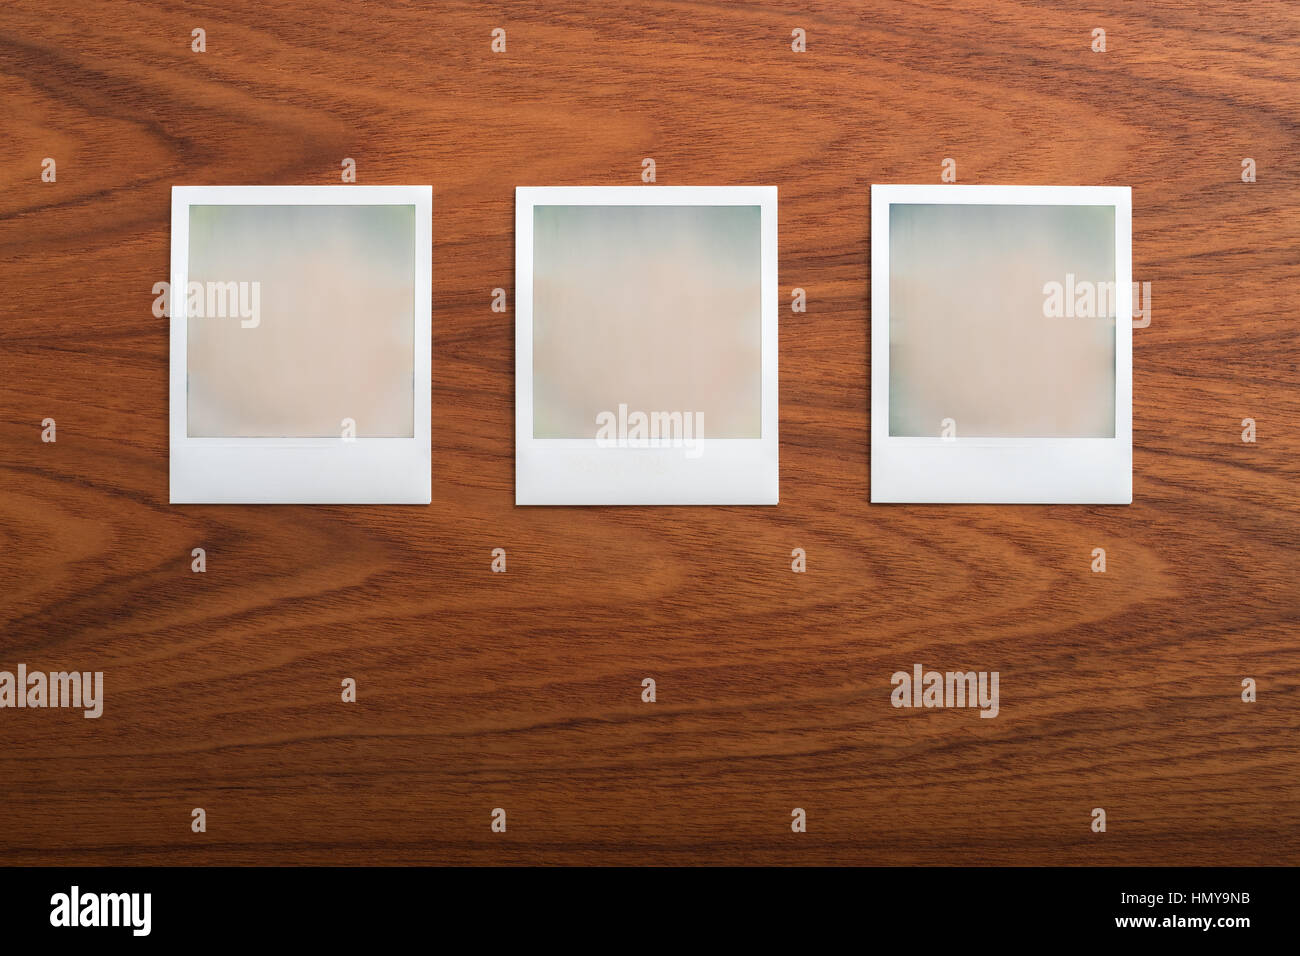 Blank instant print photographs on wooden table. Three Objects in a row. Stock Photo